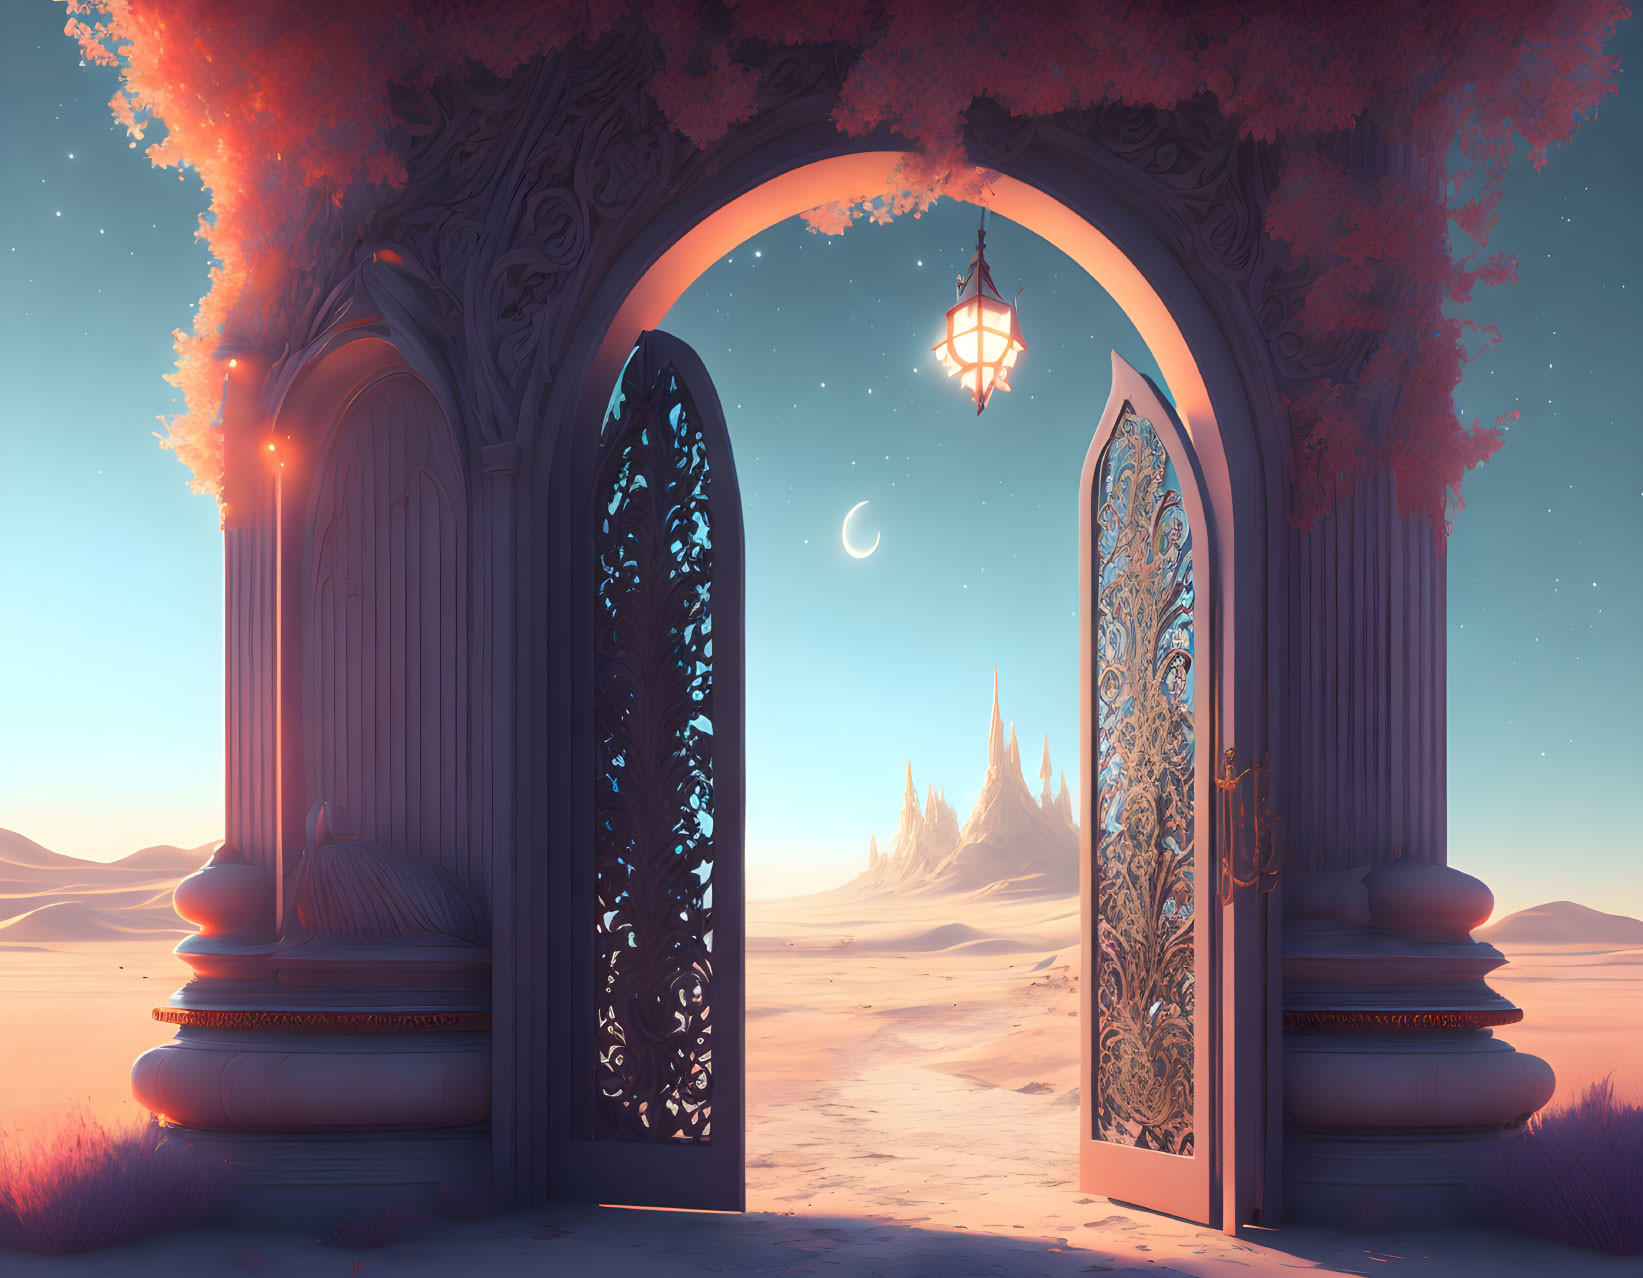 Gateway to a distant dream